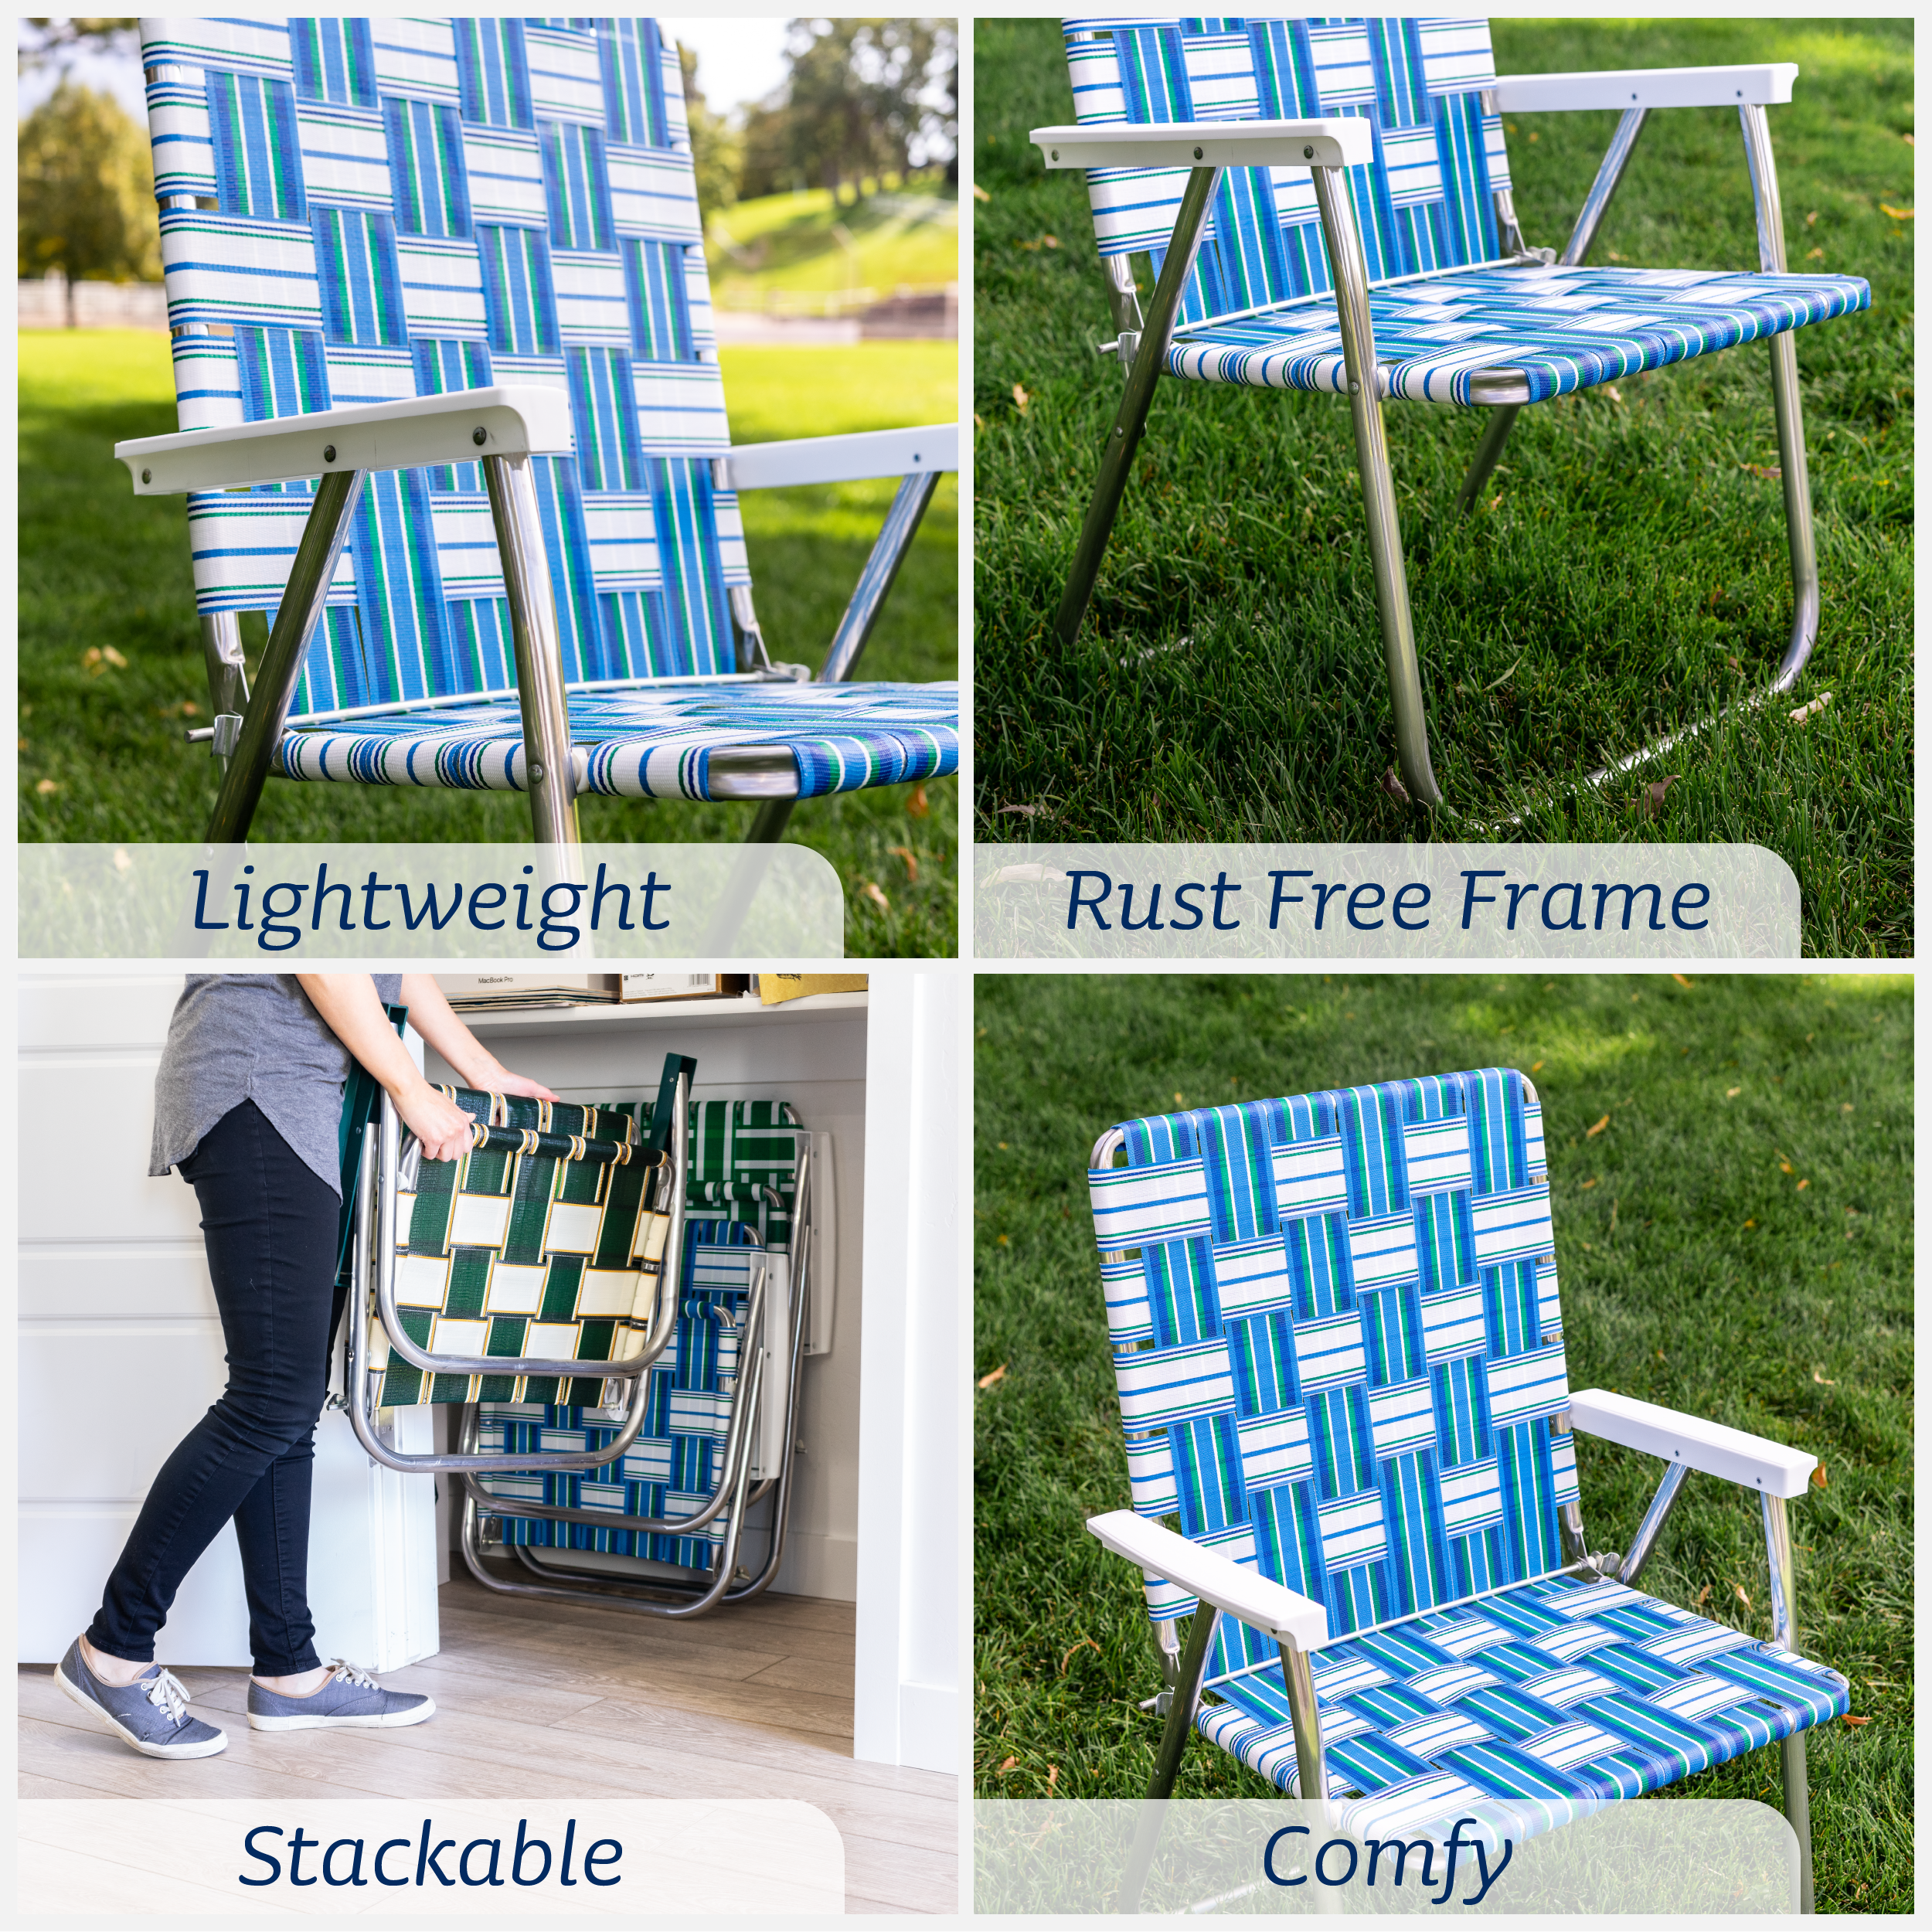 Lawn Chair USA Made in webbing aluminum best chair